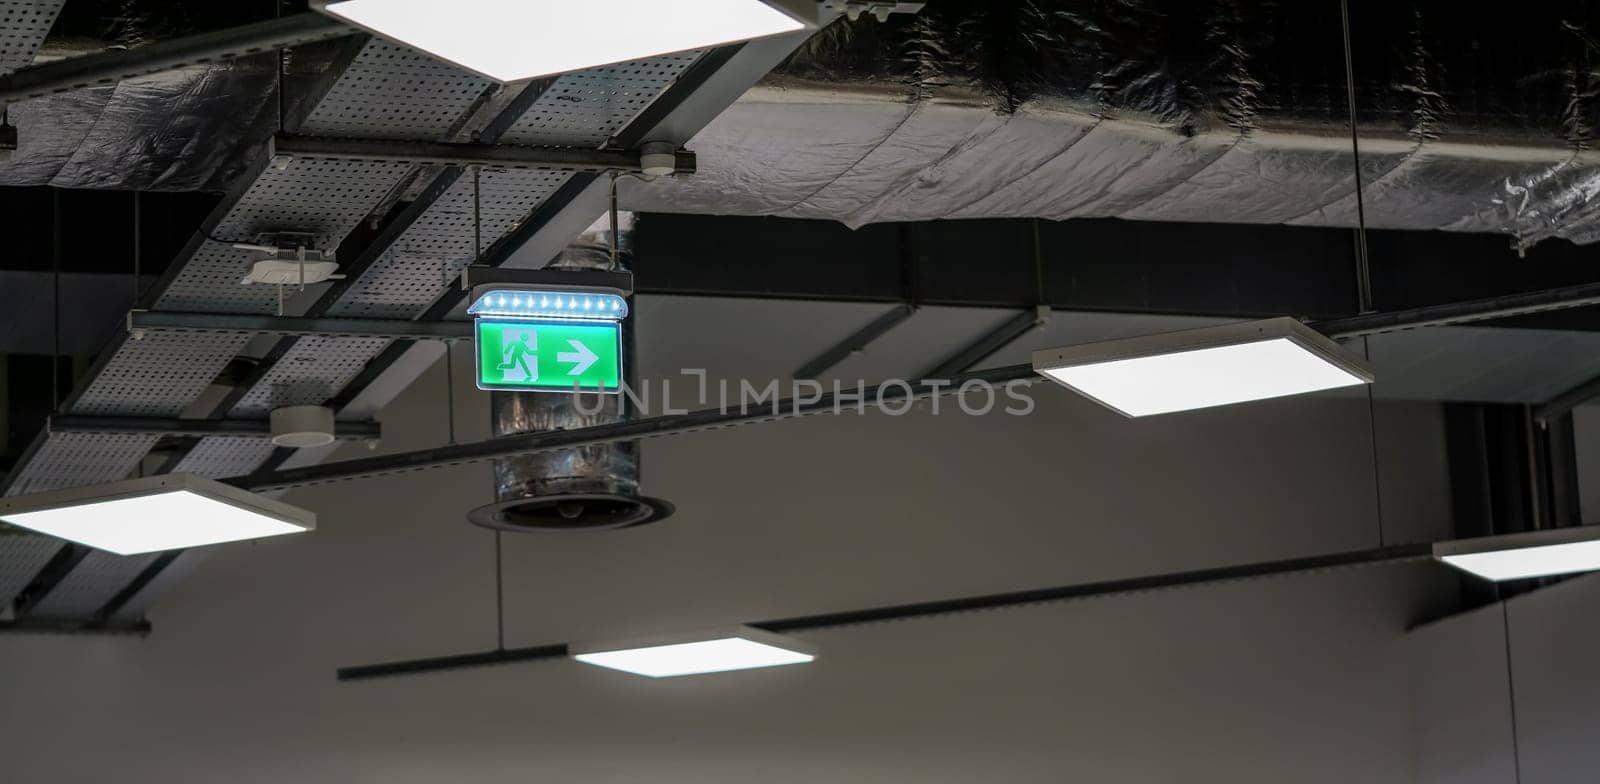 Illuminated green emergency / fire exit sign with running man pictogram on industrial roof. by Ivanko